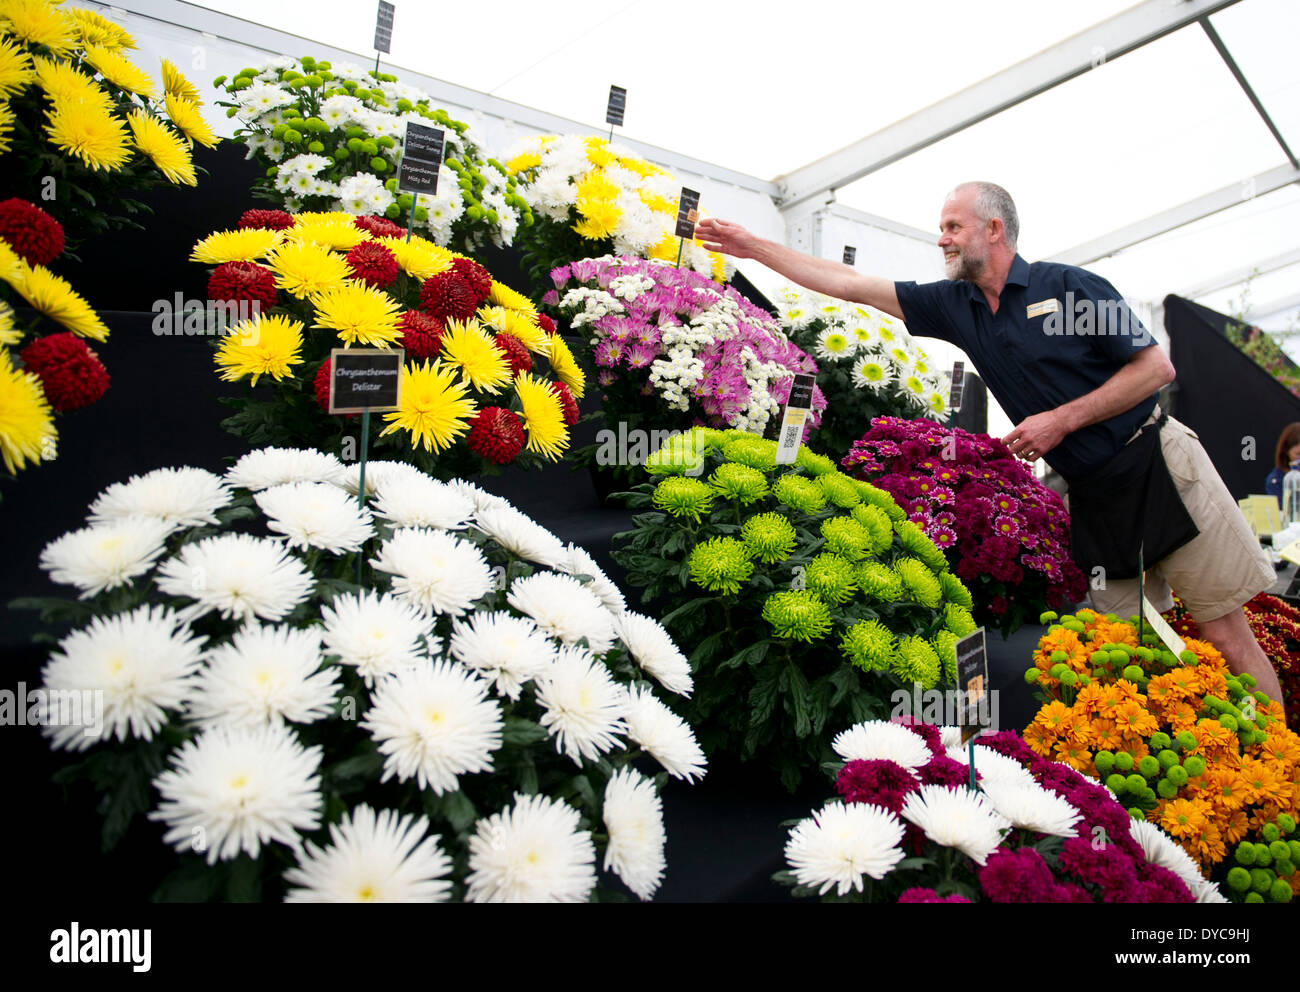 A man adjusts flowers at Cardiff's RHS flower show in Bute Park, Cardiff, south Wales. Stock Photo